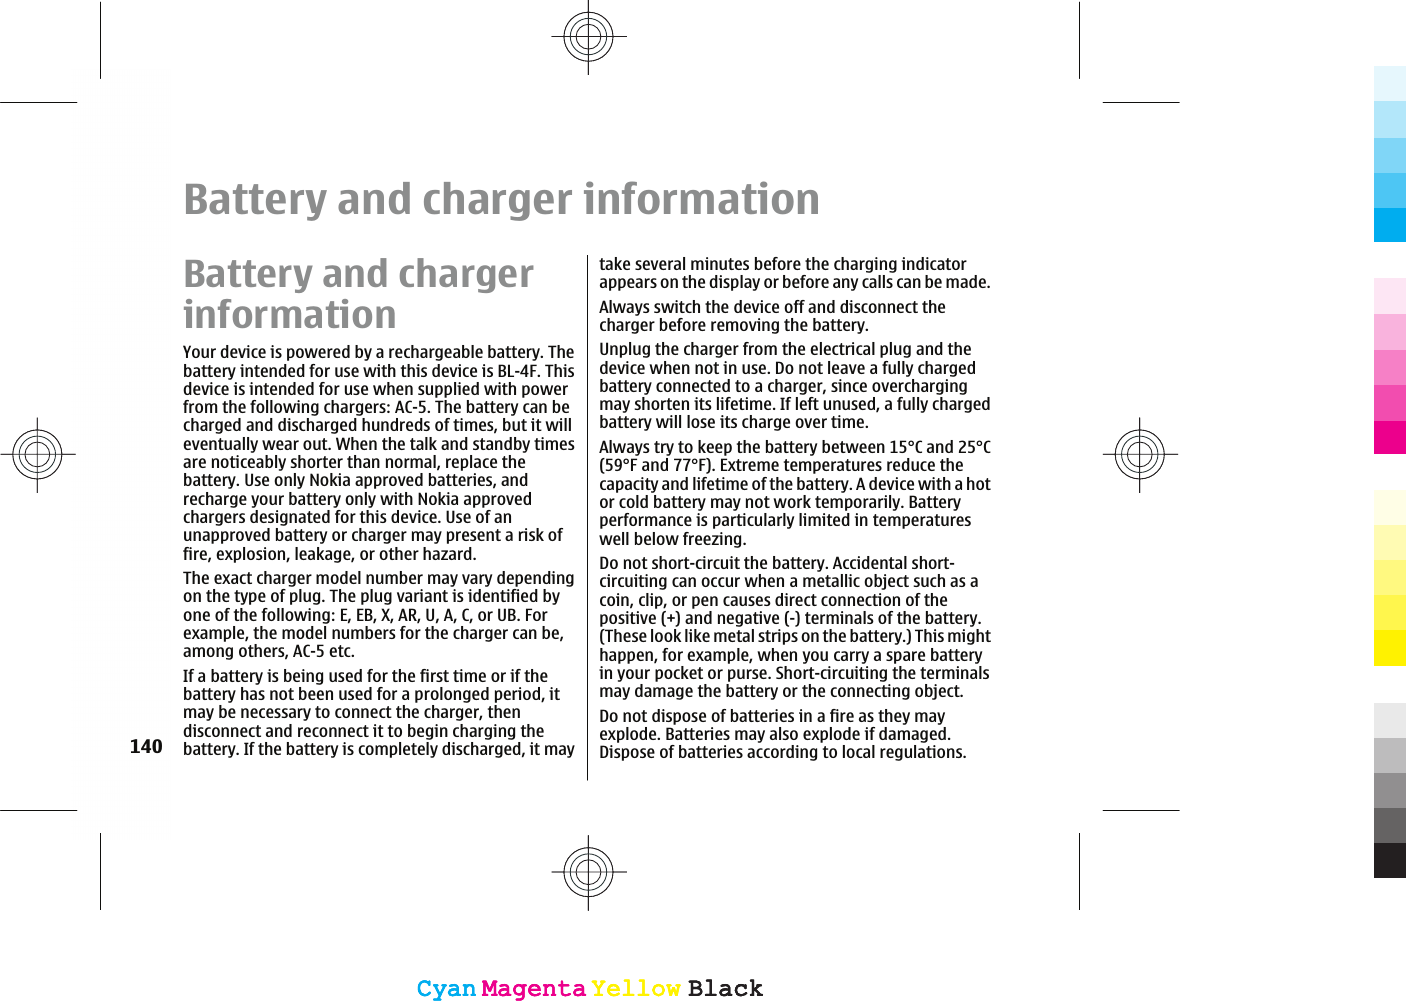 Battery and charger informationBattery and chargerinformationYour device is powered by a rechargeable battery. Thebattery intended for use with this device is BL-4F. Thisdevice is intended for use when supplied with powerfrom the following chargers: AC-5. The battery can becharged and discharged hundreds of times, but it willeventually wear out. When the talk and standby timesare noticeably shorter than normal, replace thebattery. Use only Nokia approved batteries, andrecharge your battery only with Nokia approvedchargers designated for this device. Use of anunapproved battery or charger may present a risk offire, explosion, leakage, or other hazard.The exact charger model number may vary dependingon the type of plug. The plug variant is identified byone of the following: E, EB, X, AR, U, A, C, or UB. Forexample, the model numbers for the charger can be,among others, AC-5 etc.If a battery is being used for the first time or if thebattery has not been used for a prolonged period, itmay be necessary to connect the charger, thendisconnect and reconnect it to begin charging thebattery. If the battery is completely discharged, it maytake several minutes before the charging indicatorappears on the display or before any calls can be made.Always switch the device off and disconnect thecharger before removing the battery.Unplug the charger from the electrical plug and thedevice when not in use. Do not leave a fully chargedbattery connected to a charger, since overchargingmay shorten its lifetime. If left unused, a fully chargedbattery will lose its charge over time.Always try to keep the battery between 15°C and 25°C(59°F and 77°F). Extreme temperatures reduce thecapacity and lifetime of the battery. A device with a hotor cold battery may not work temporarily. Batteryperformance is particularly limited in temperatureswell below freezing.Do not short-circuit the battery. Accidental short-circuiting can occur when a metallic object such as acoin, clip, or pen causes direct connection of thepositive (+) and negative (-) terminals of the battery.(These look like metal strips on the battery.) This mighthappen, for example, when you carry a spare batteryin your pocket or purse. Short-circuiting the terminalsmay damage the battery or the connecting object.Do not dispose of batteries in a fire as they mayexplode. Batteries may also explode if damaged.Dispose of batteries according to local regulations.140CyanCyanMagentaMagentaYellowYellowBlackBlackCyanCyanMagentaMagentaYellowYellowBlackBlack